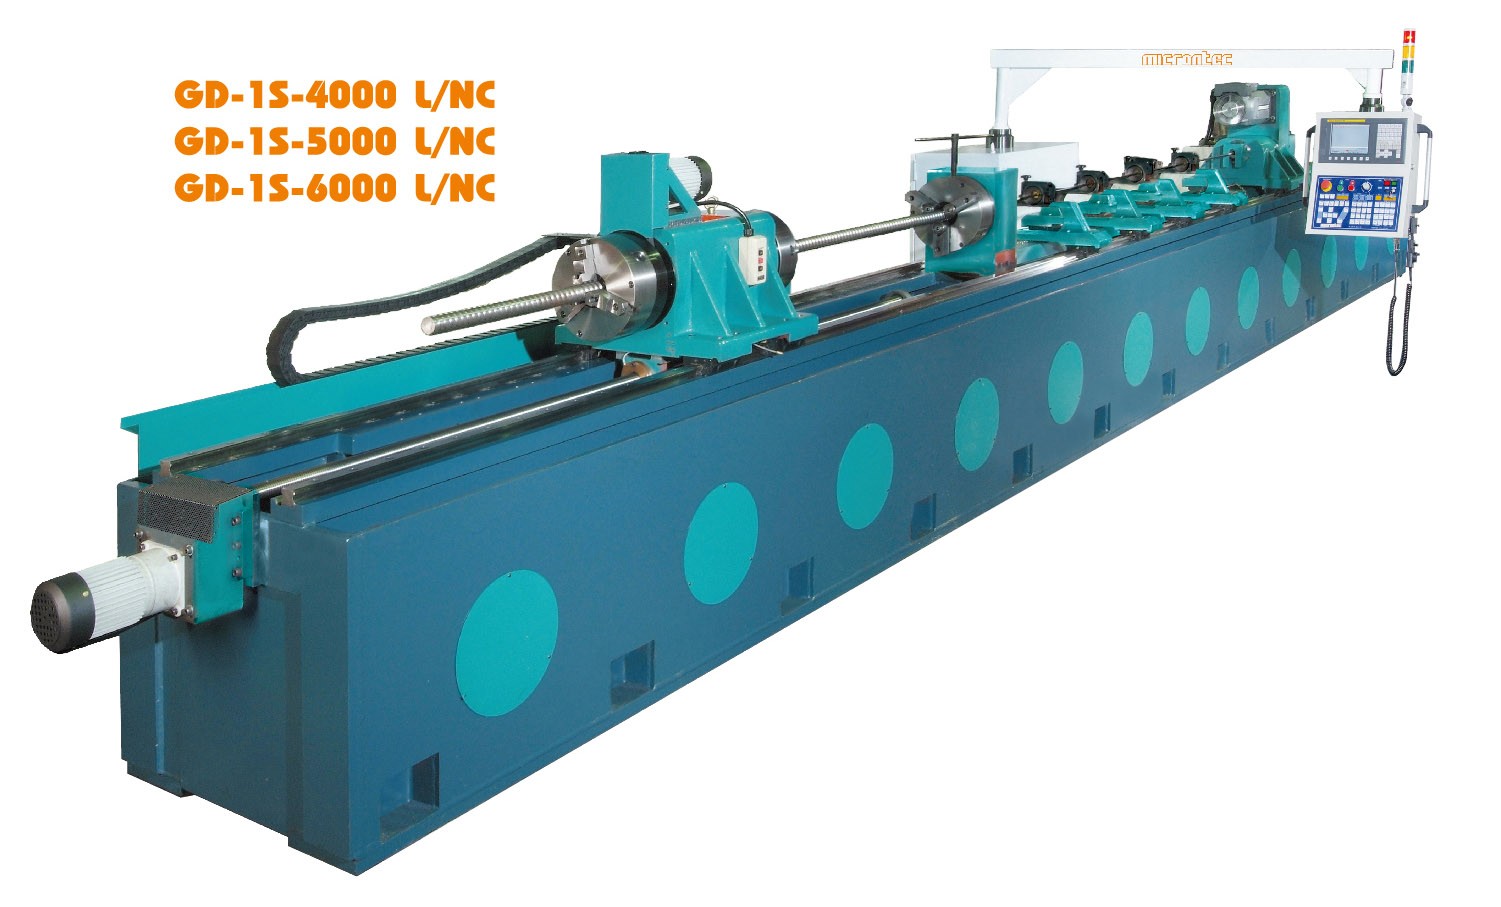 SINGLE SPINDLE LENGTHEN OVER BED TYPE – CENTER OF A CIRCLE DRILLING MACHINE SYSTEM